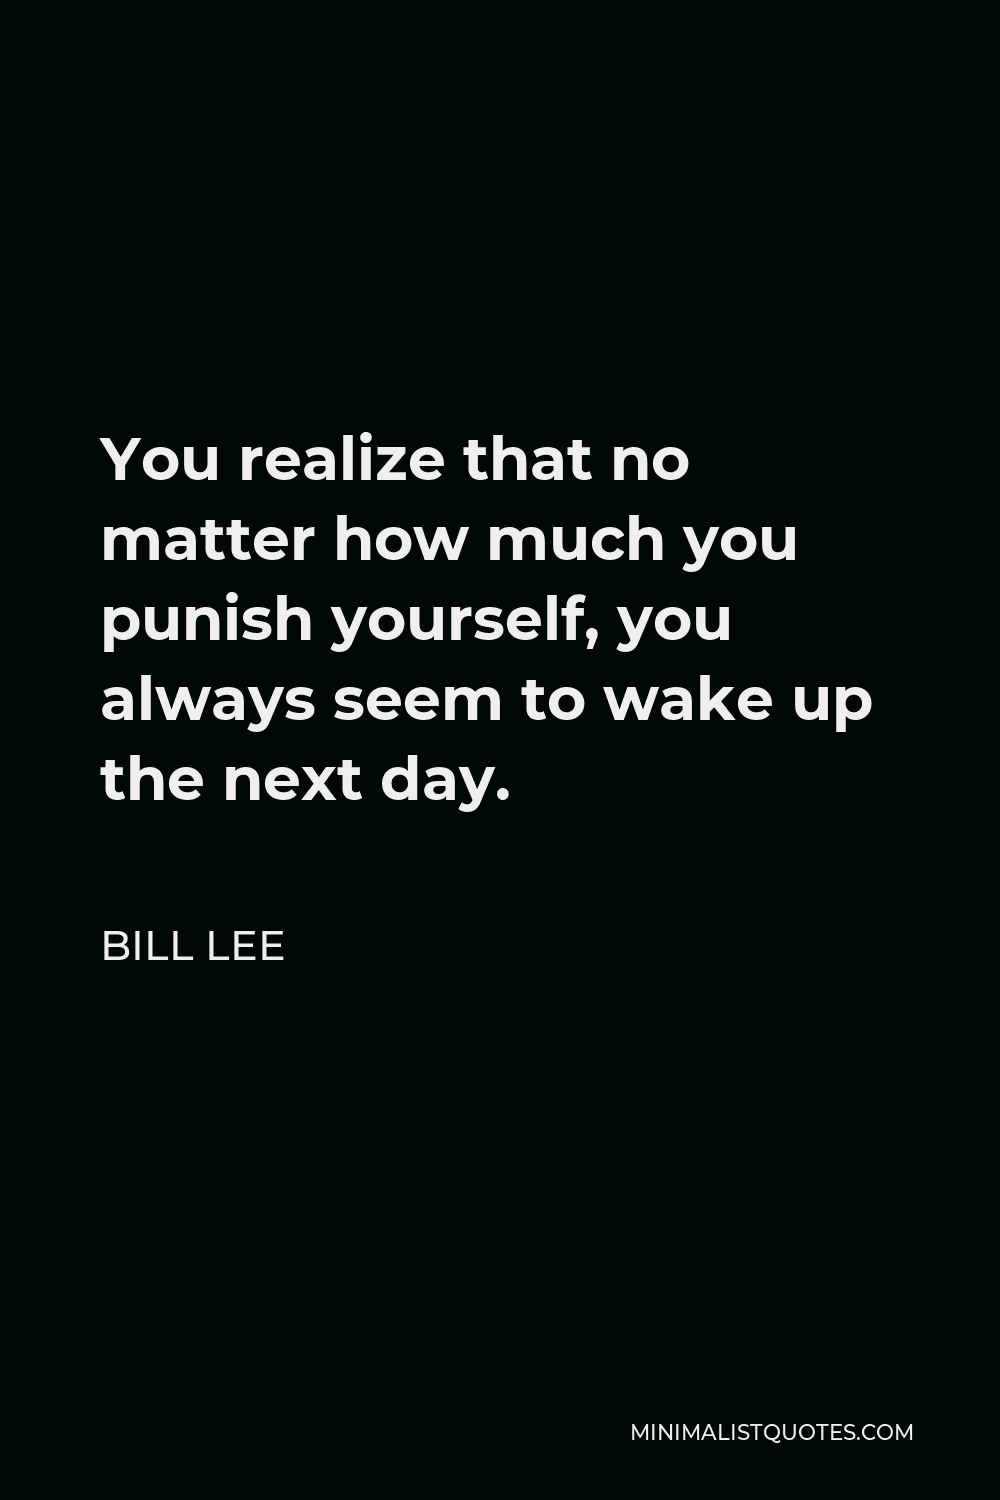 Bill Lee Quote - You realize that no matter how much you punish yourself, you always seem to wake up the next day.